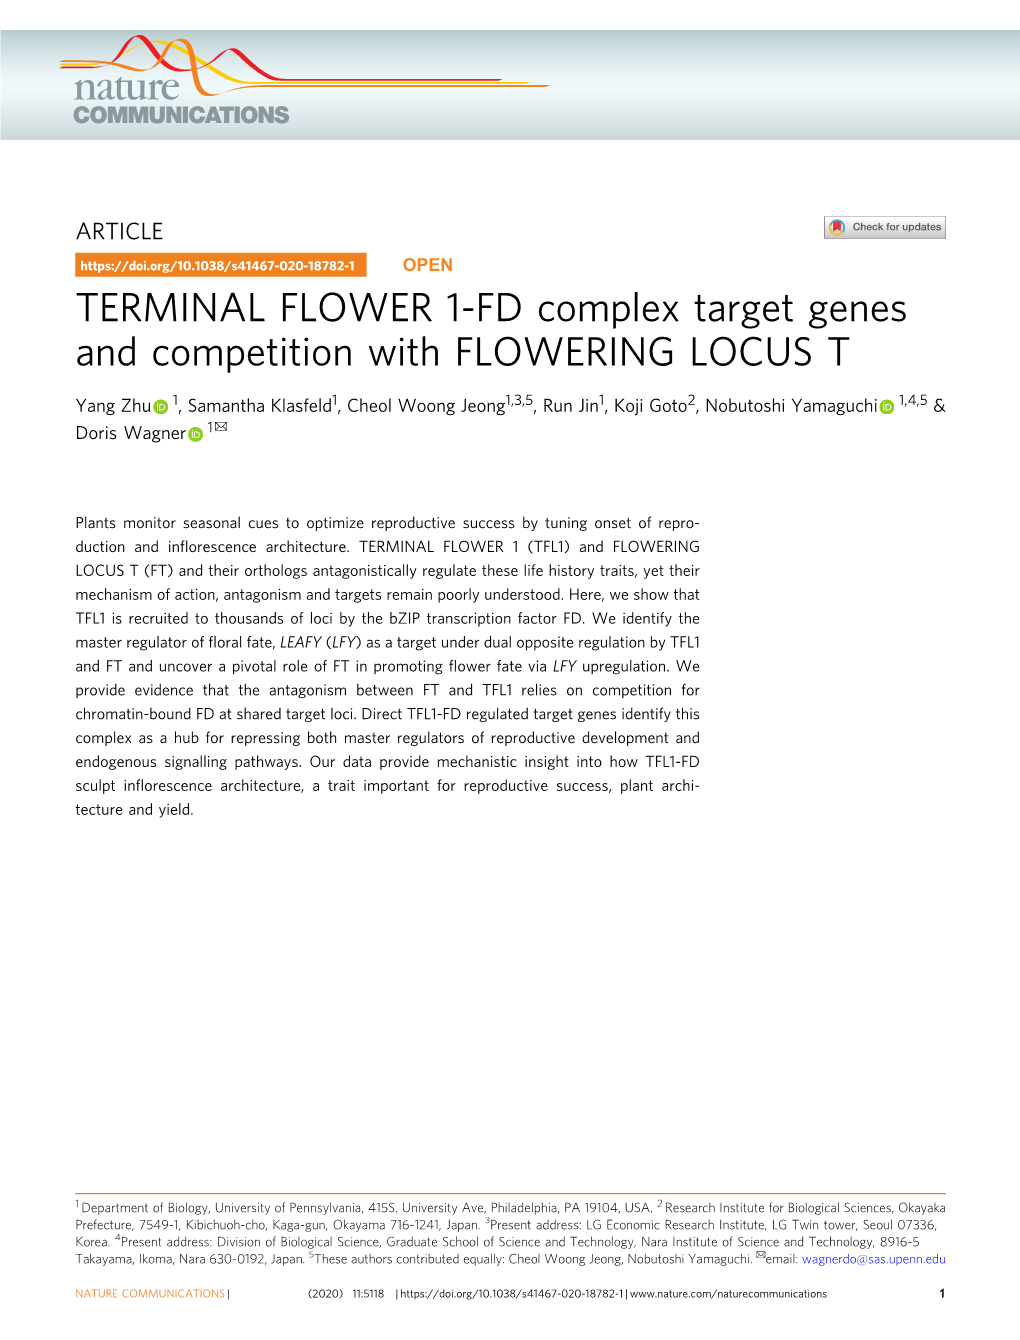 TERMINAL FLOWER 1-FD Complex Target Genes and Competition with FLOWERING LOCUS T